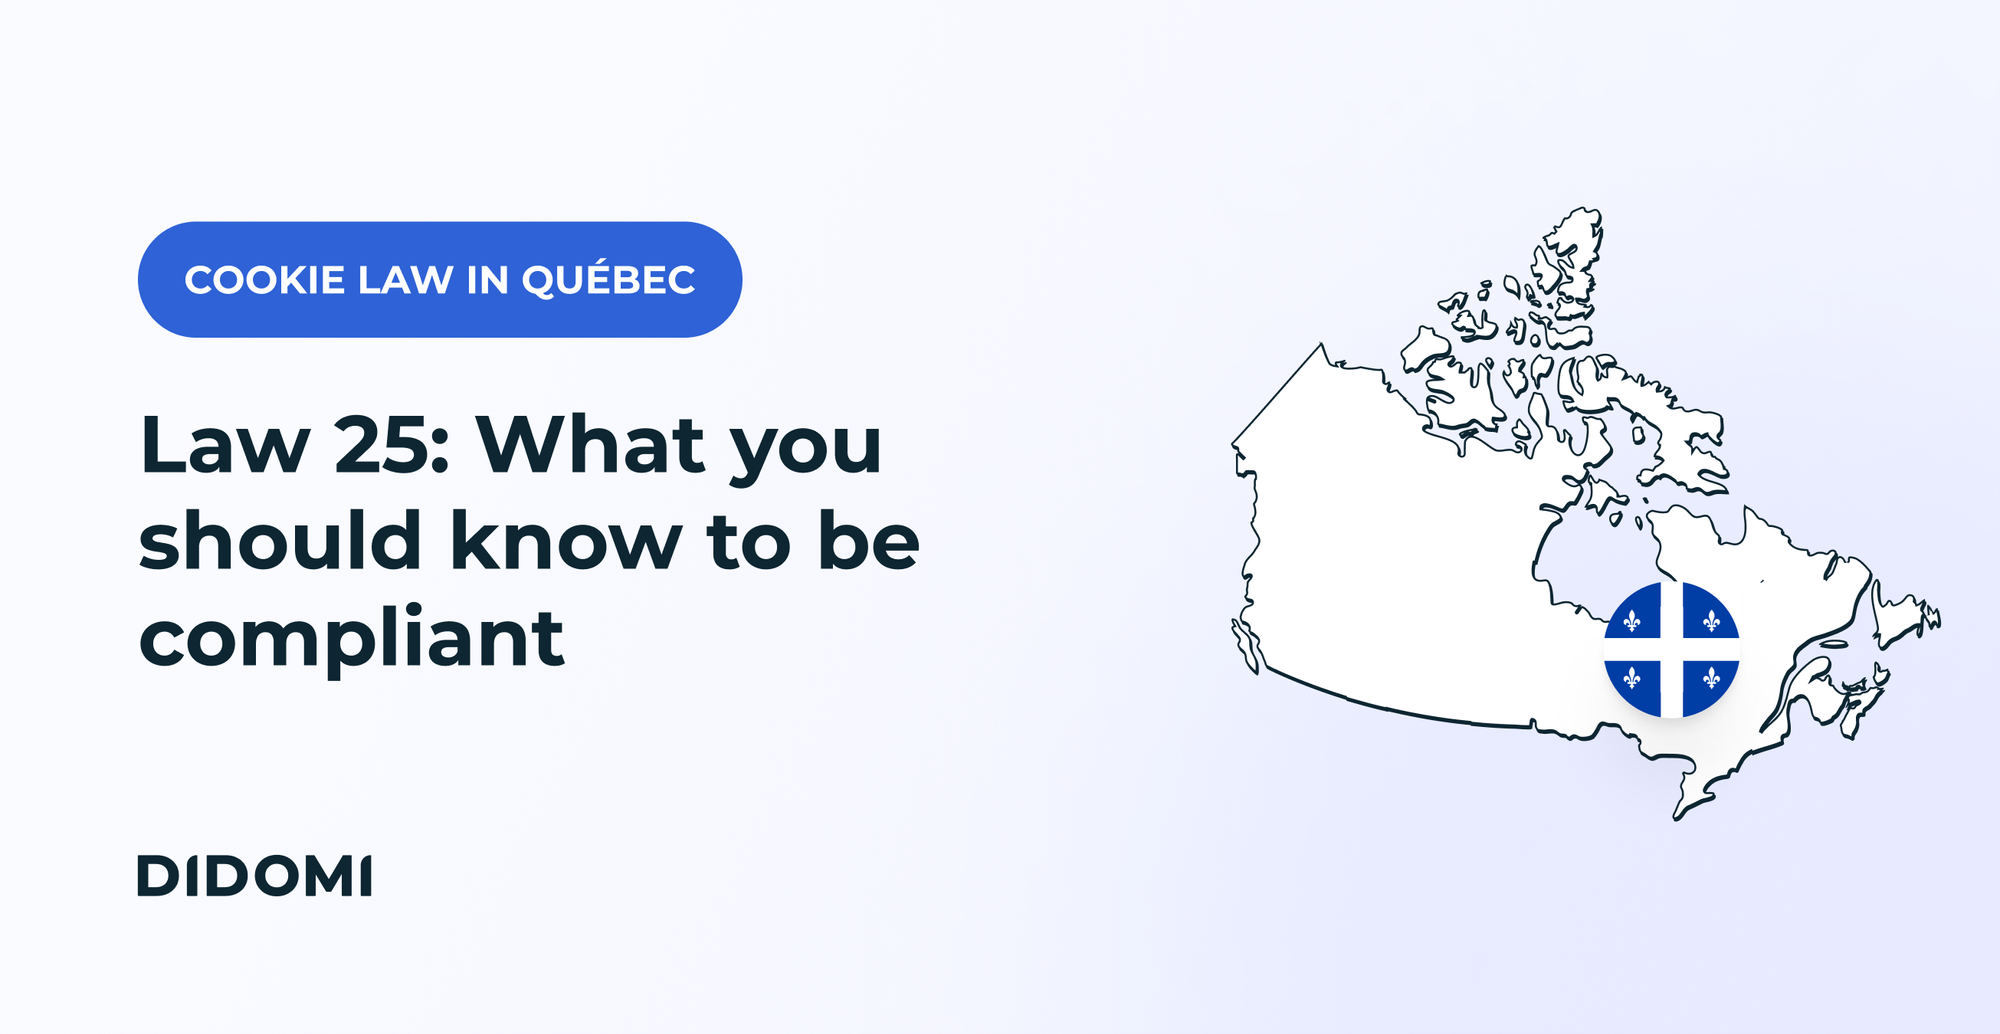 Quebec's Law 25: What Is It and What Do You Need to Know?